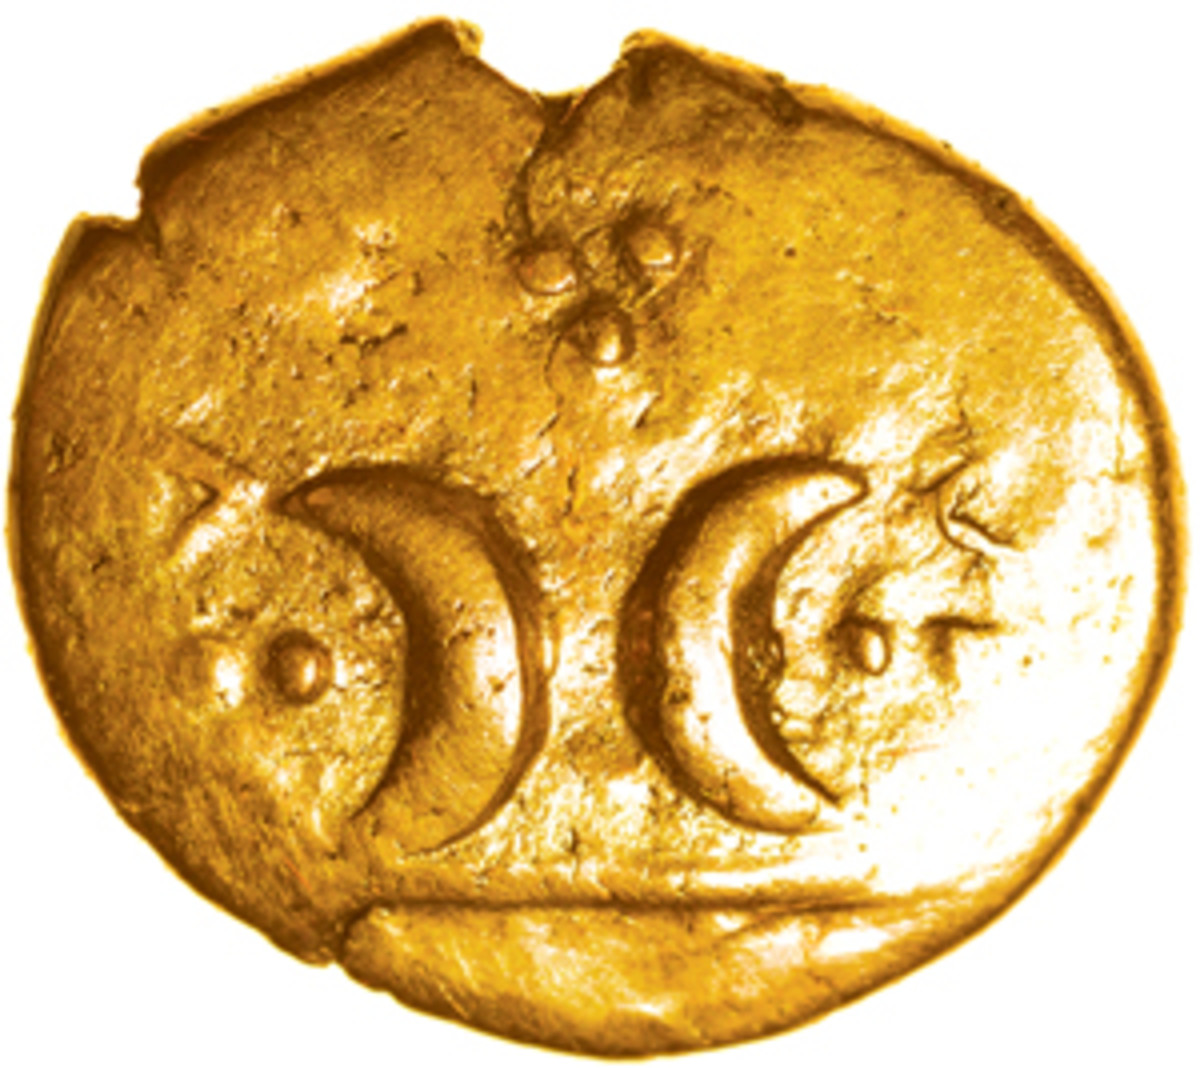  Gold stater (ABC 1444) sold by Chris Rudd in January for $4,322. One of c.90 found at Freckenham in 1885. (Image courtesy Chris Rudd)